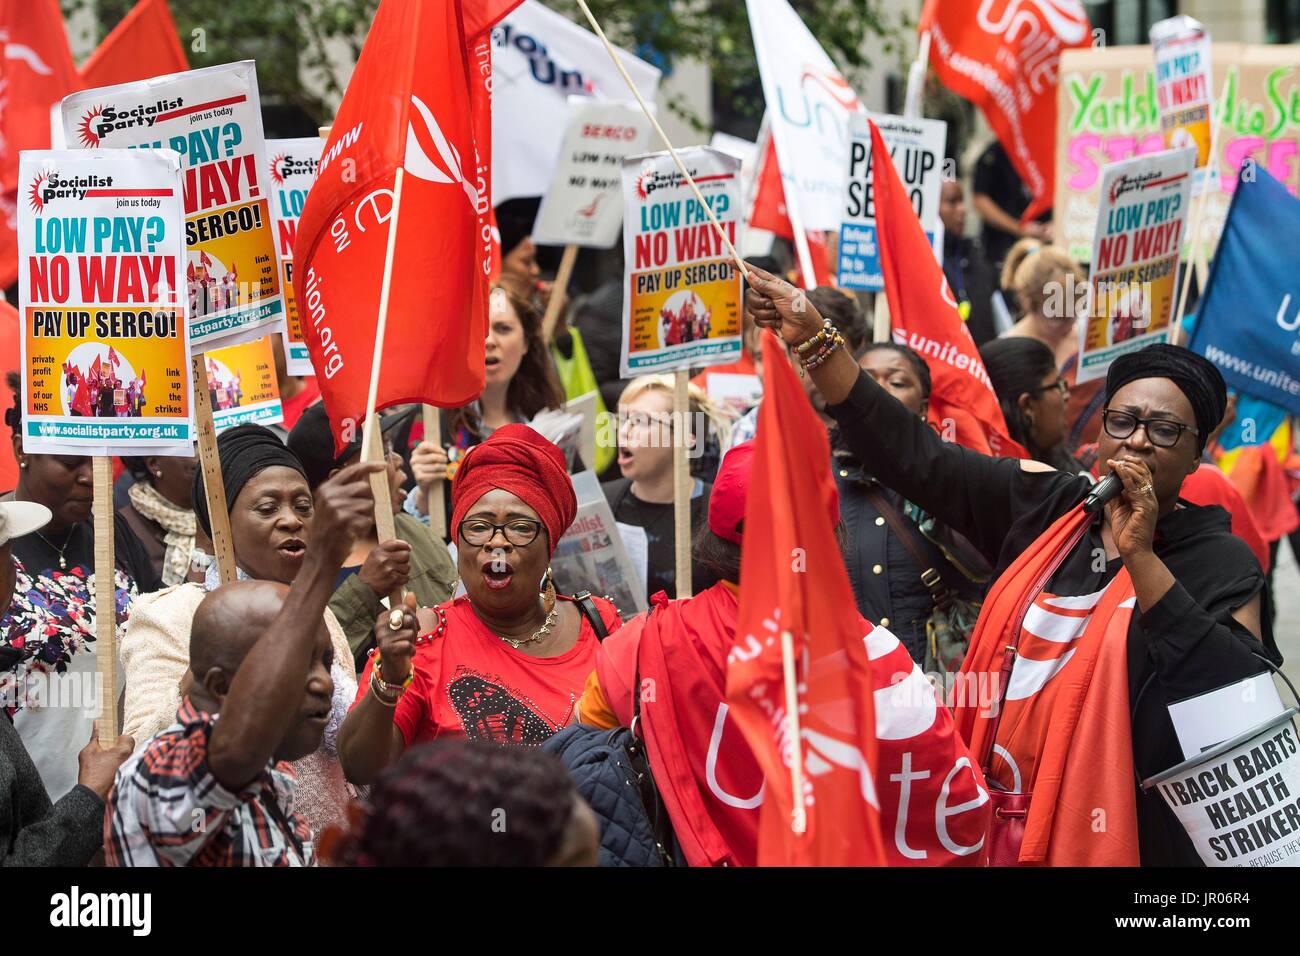 Members of Unite employed by Serco at Barts Health NHS Trust, on strike over pay, protest outside Serco's presentation of financial results at JP Morgan, in London. Stock Photo